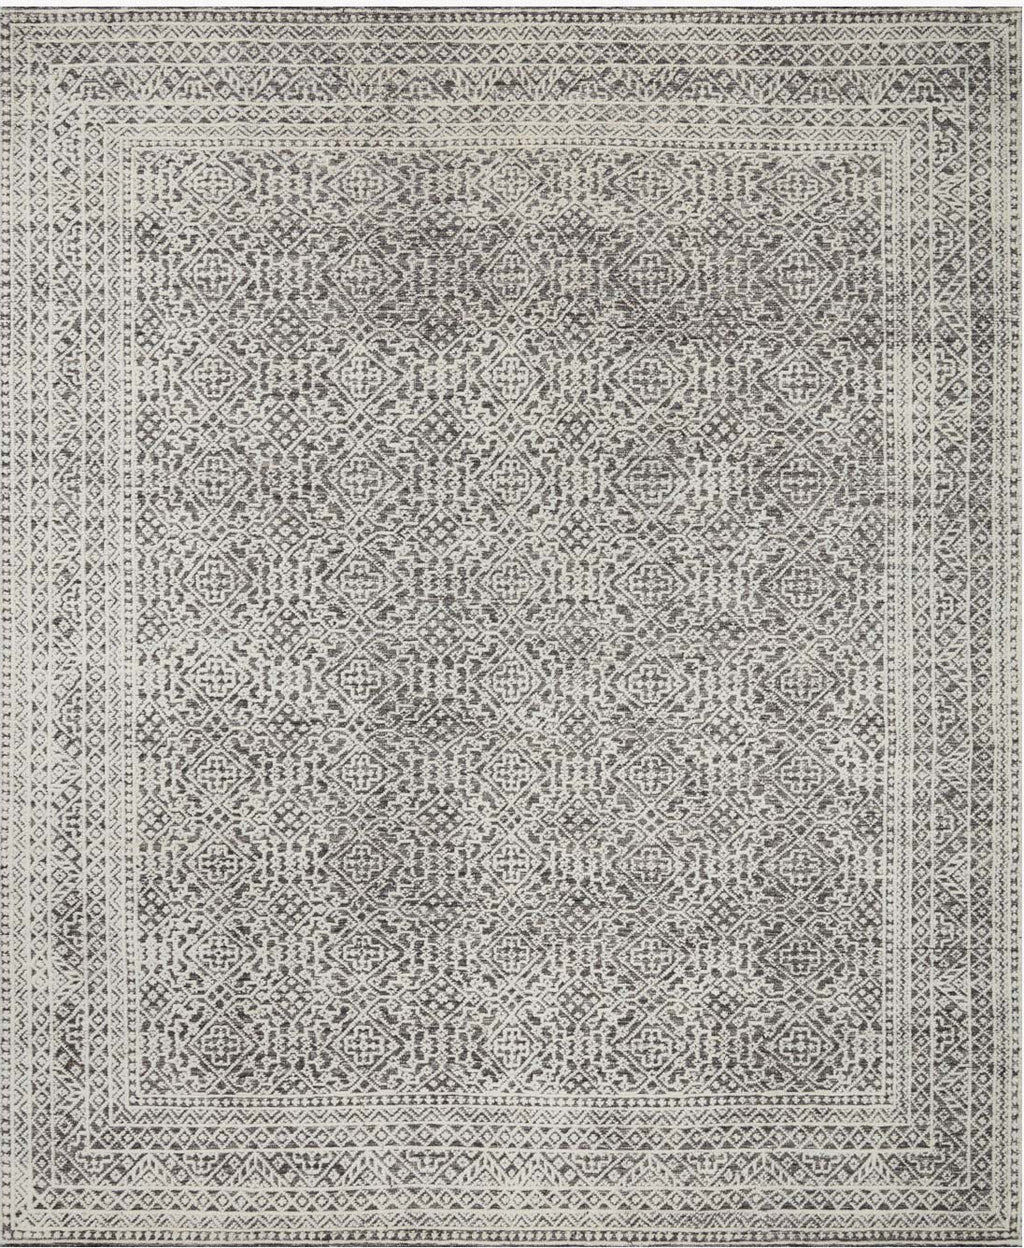 Loloi Indo Transitional Wool One of a Kind Grey Area Rug main image